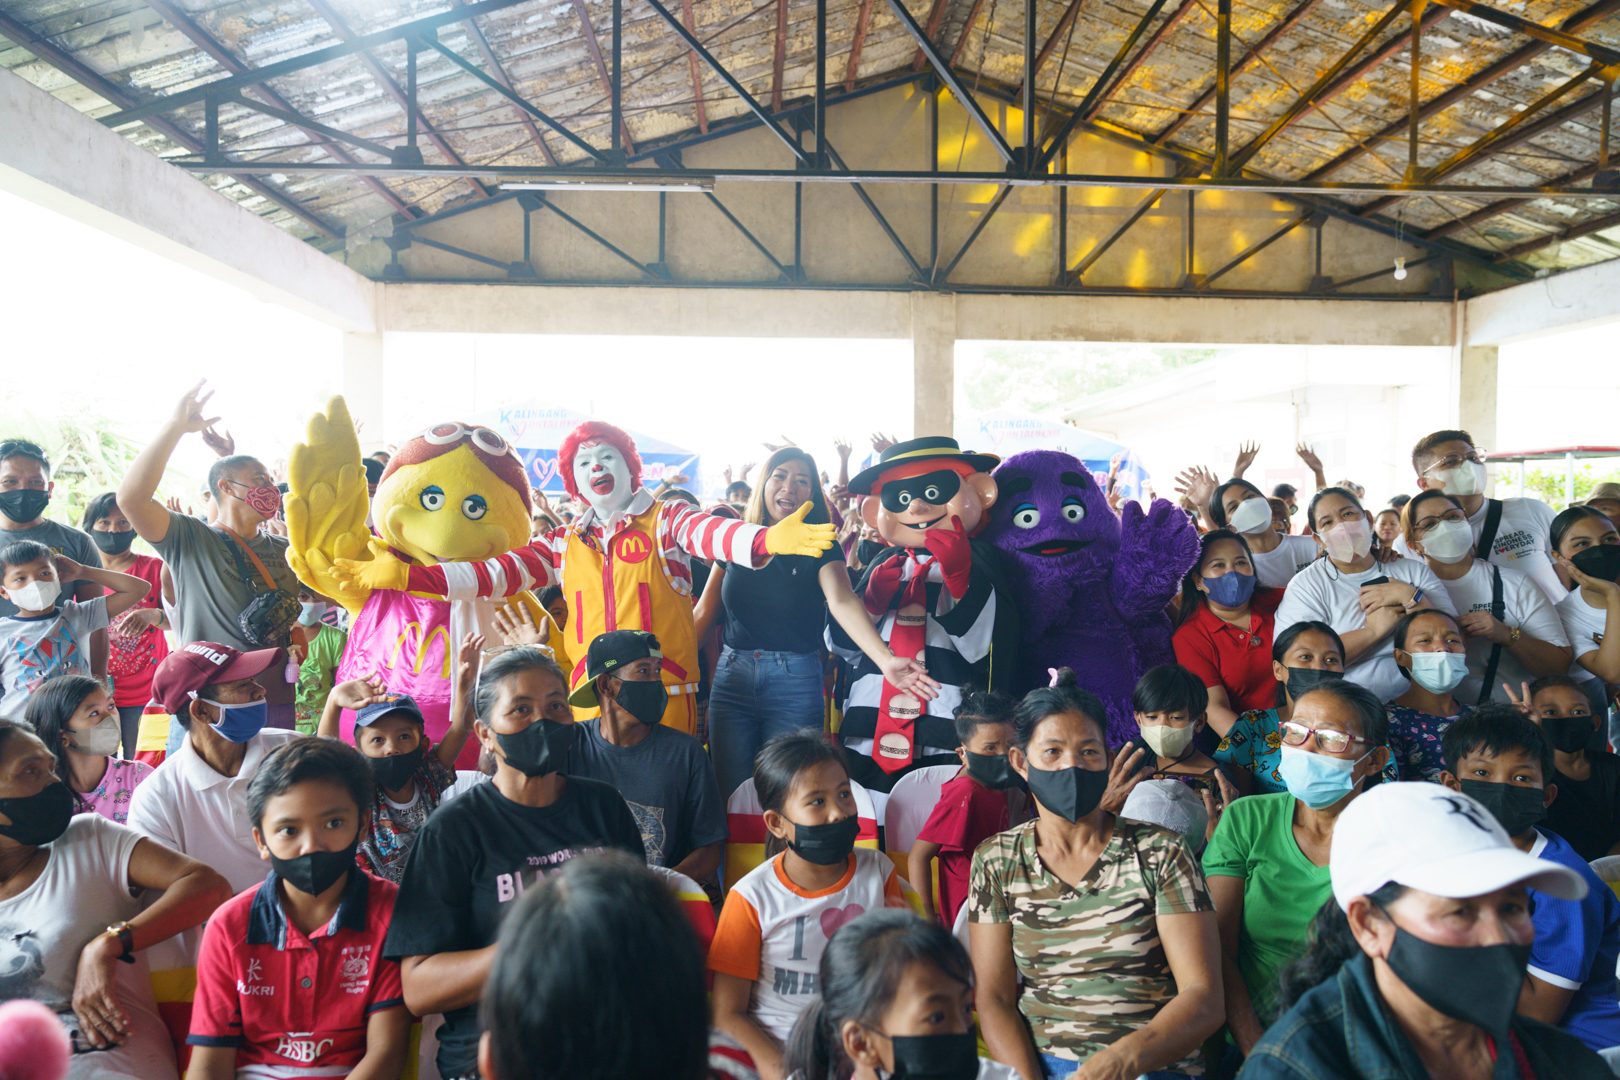 McDonald’s and Coca-Cola share the light of Christmas with families of Sitio Pintor